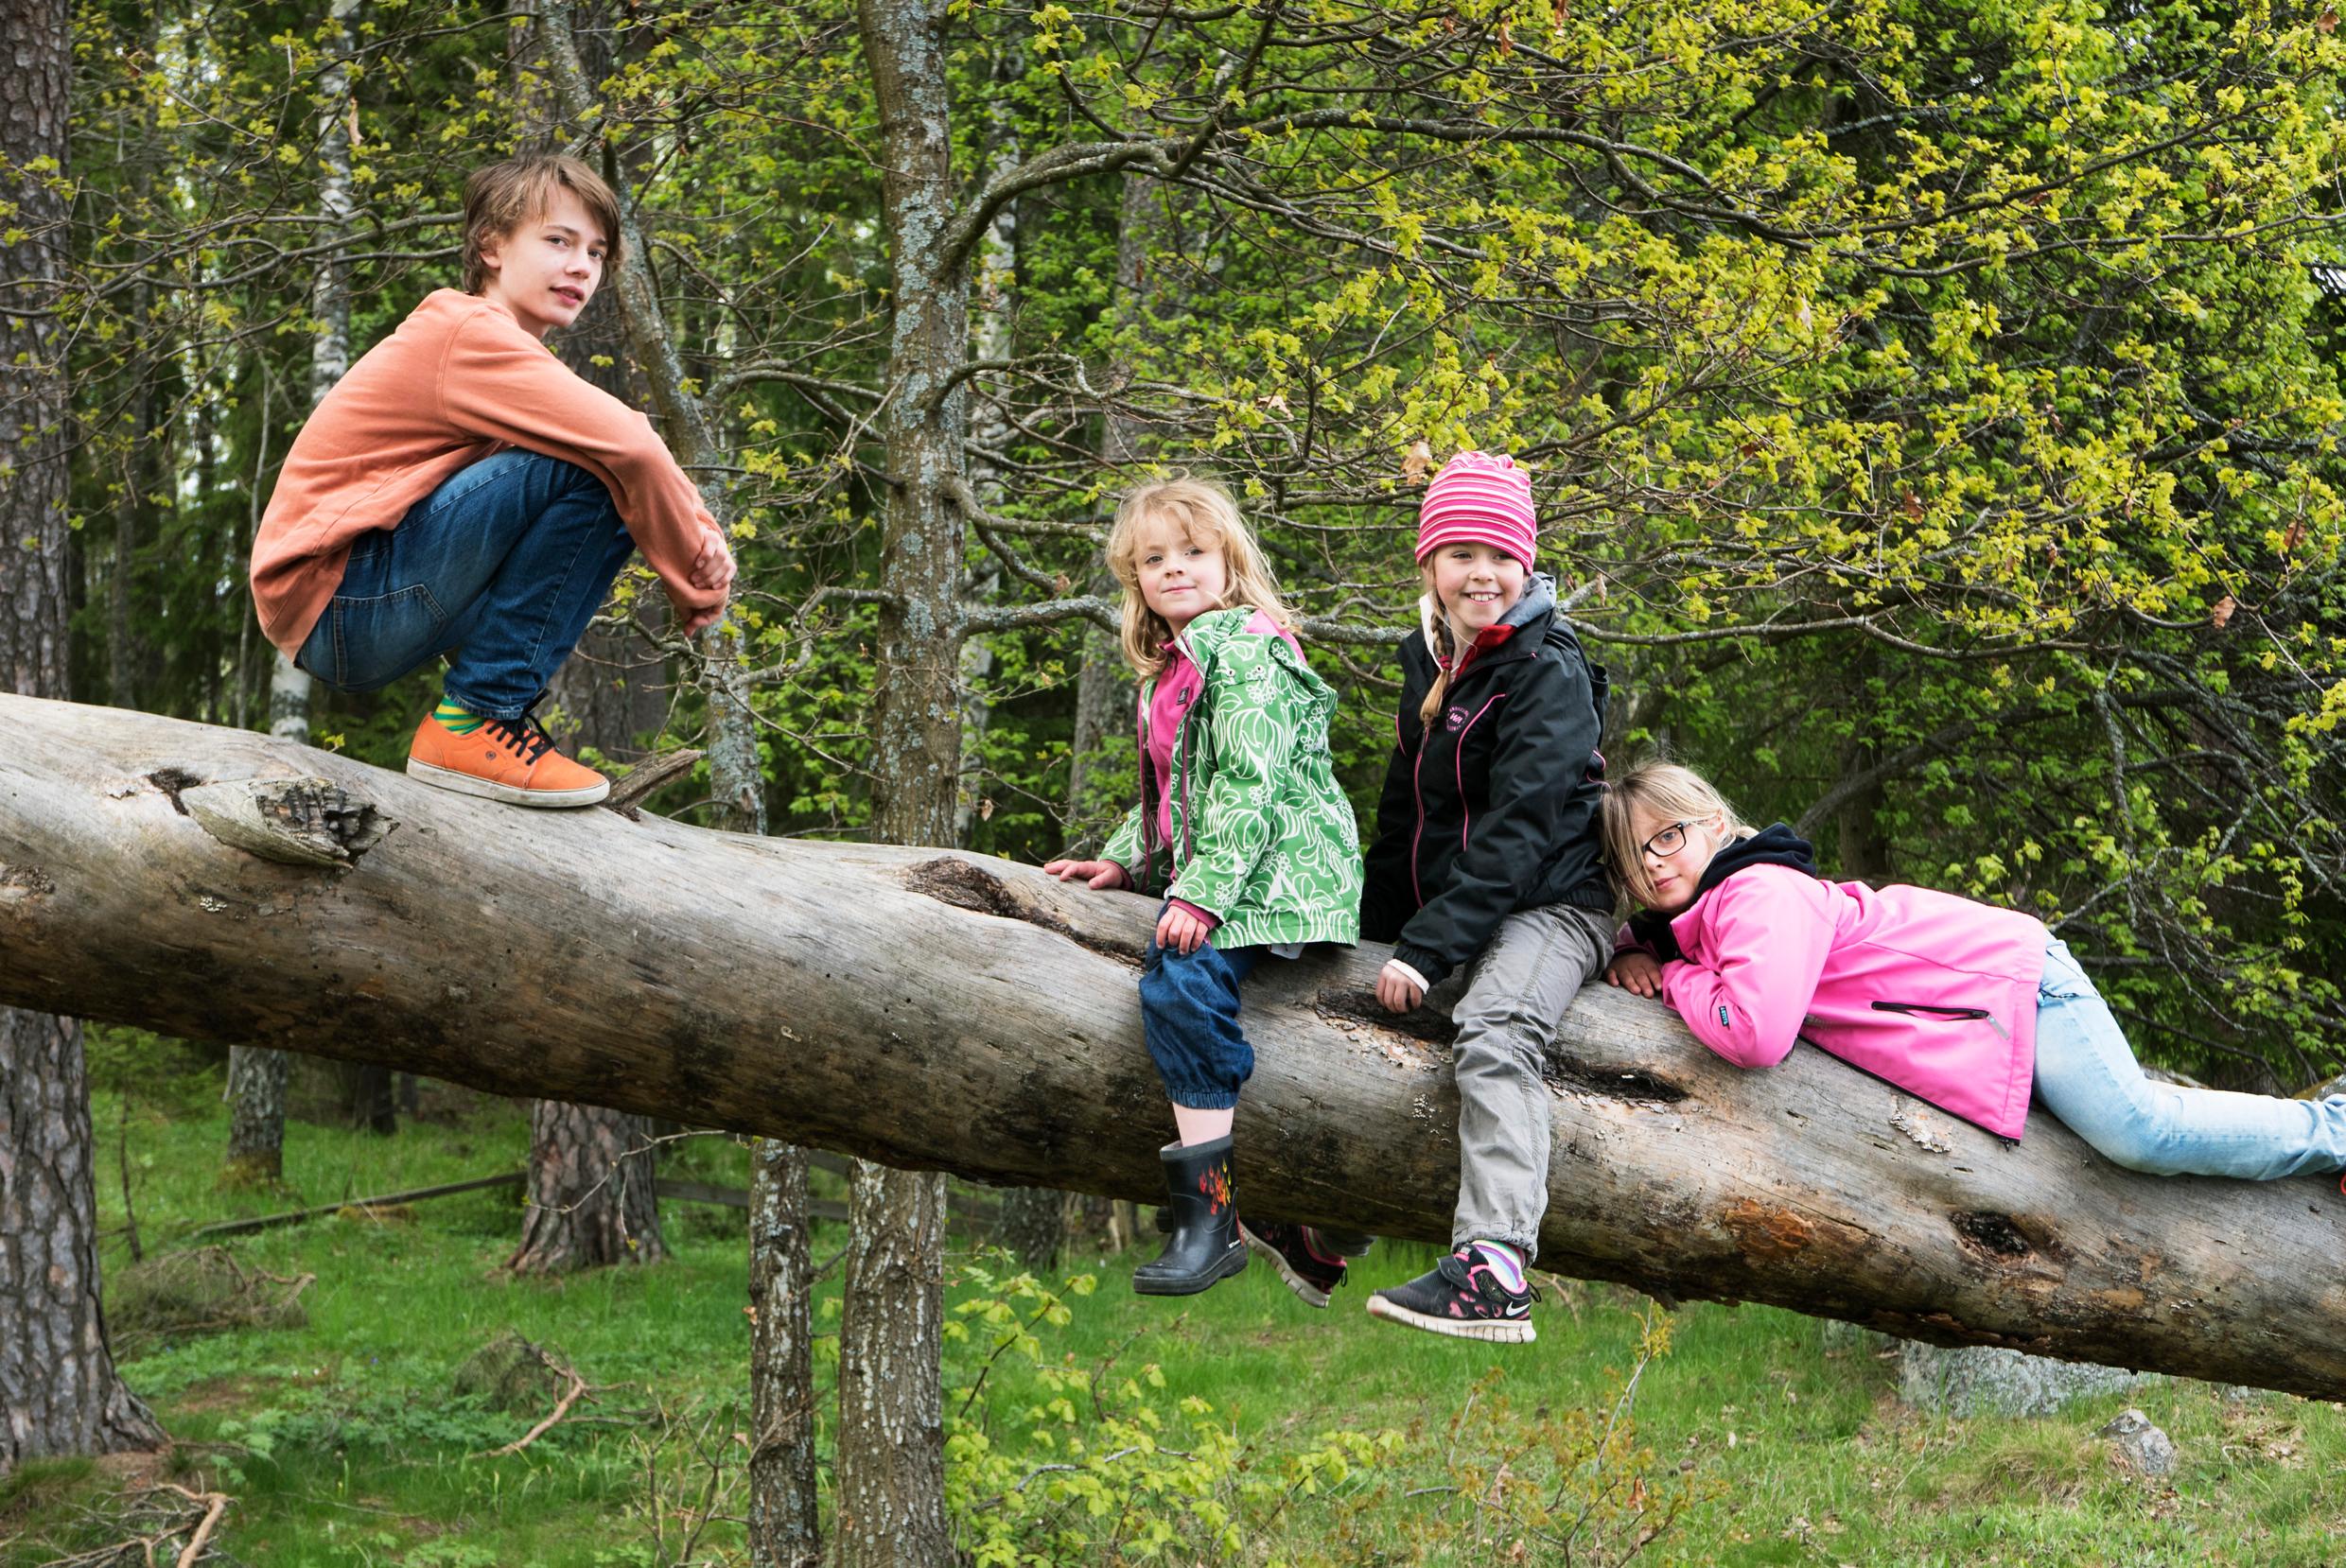 Four children sitting and lying on a leaning tree trunk in nature.